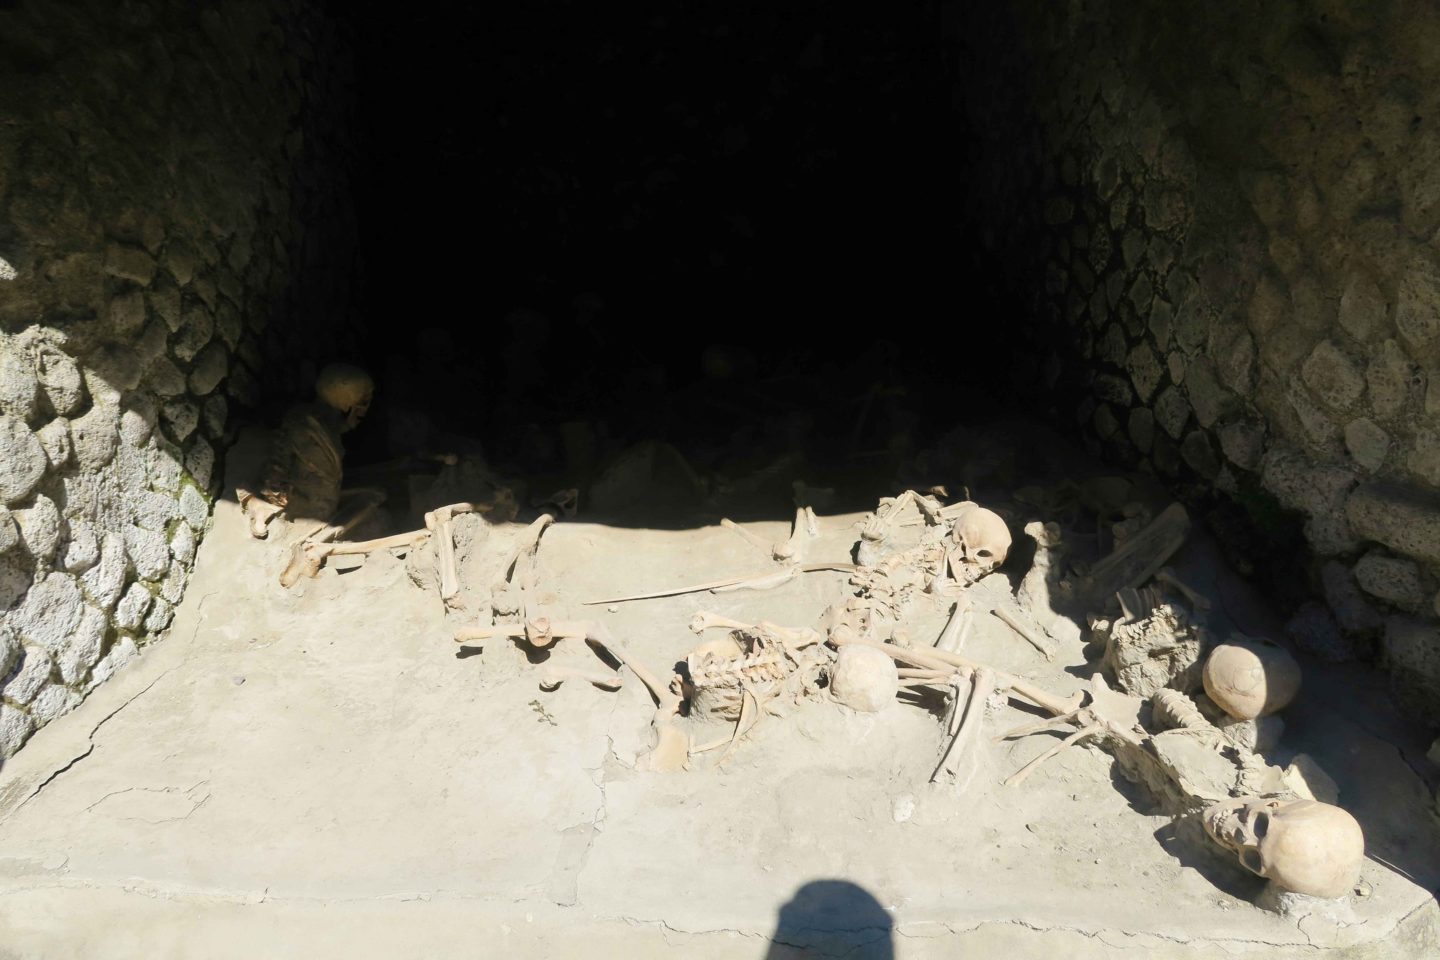 skeletons found at the archeological site of herculaneum in italy